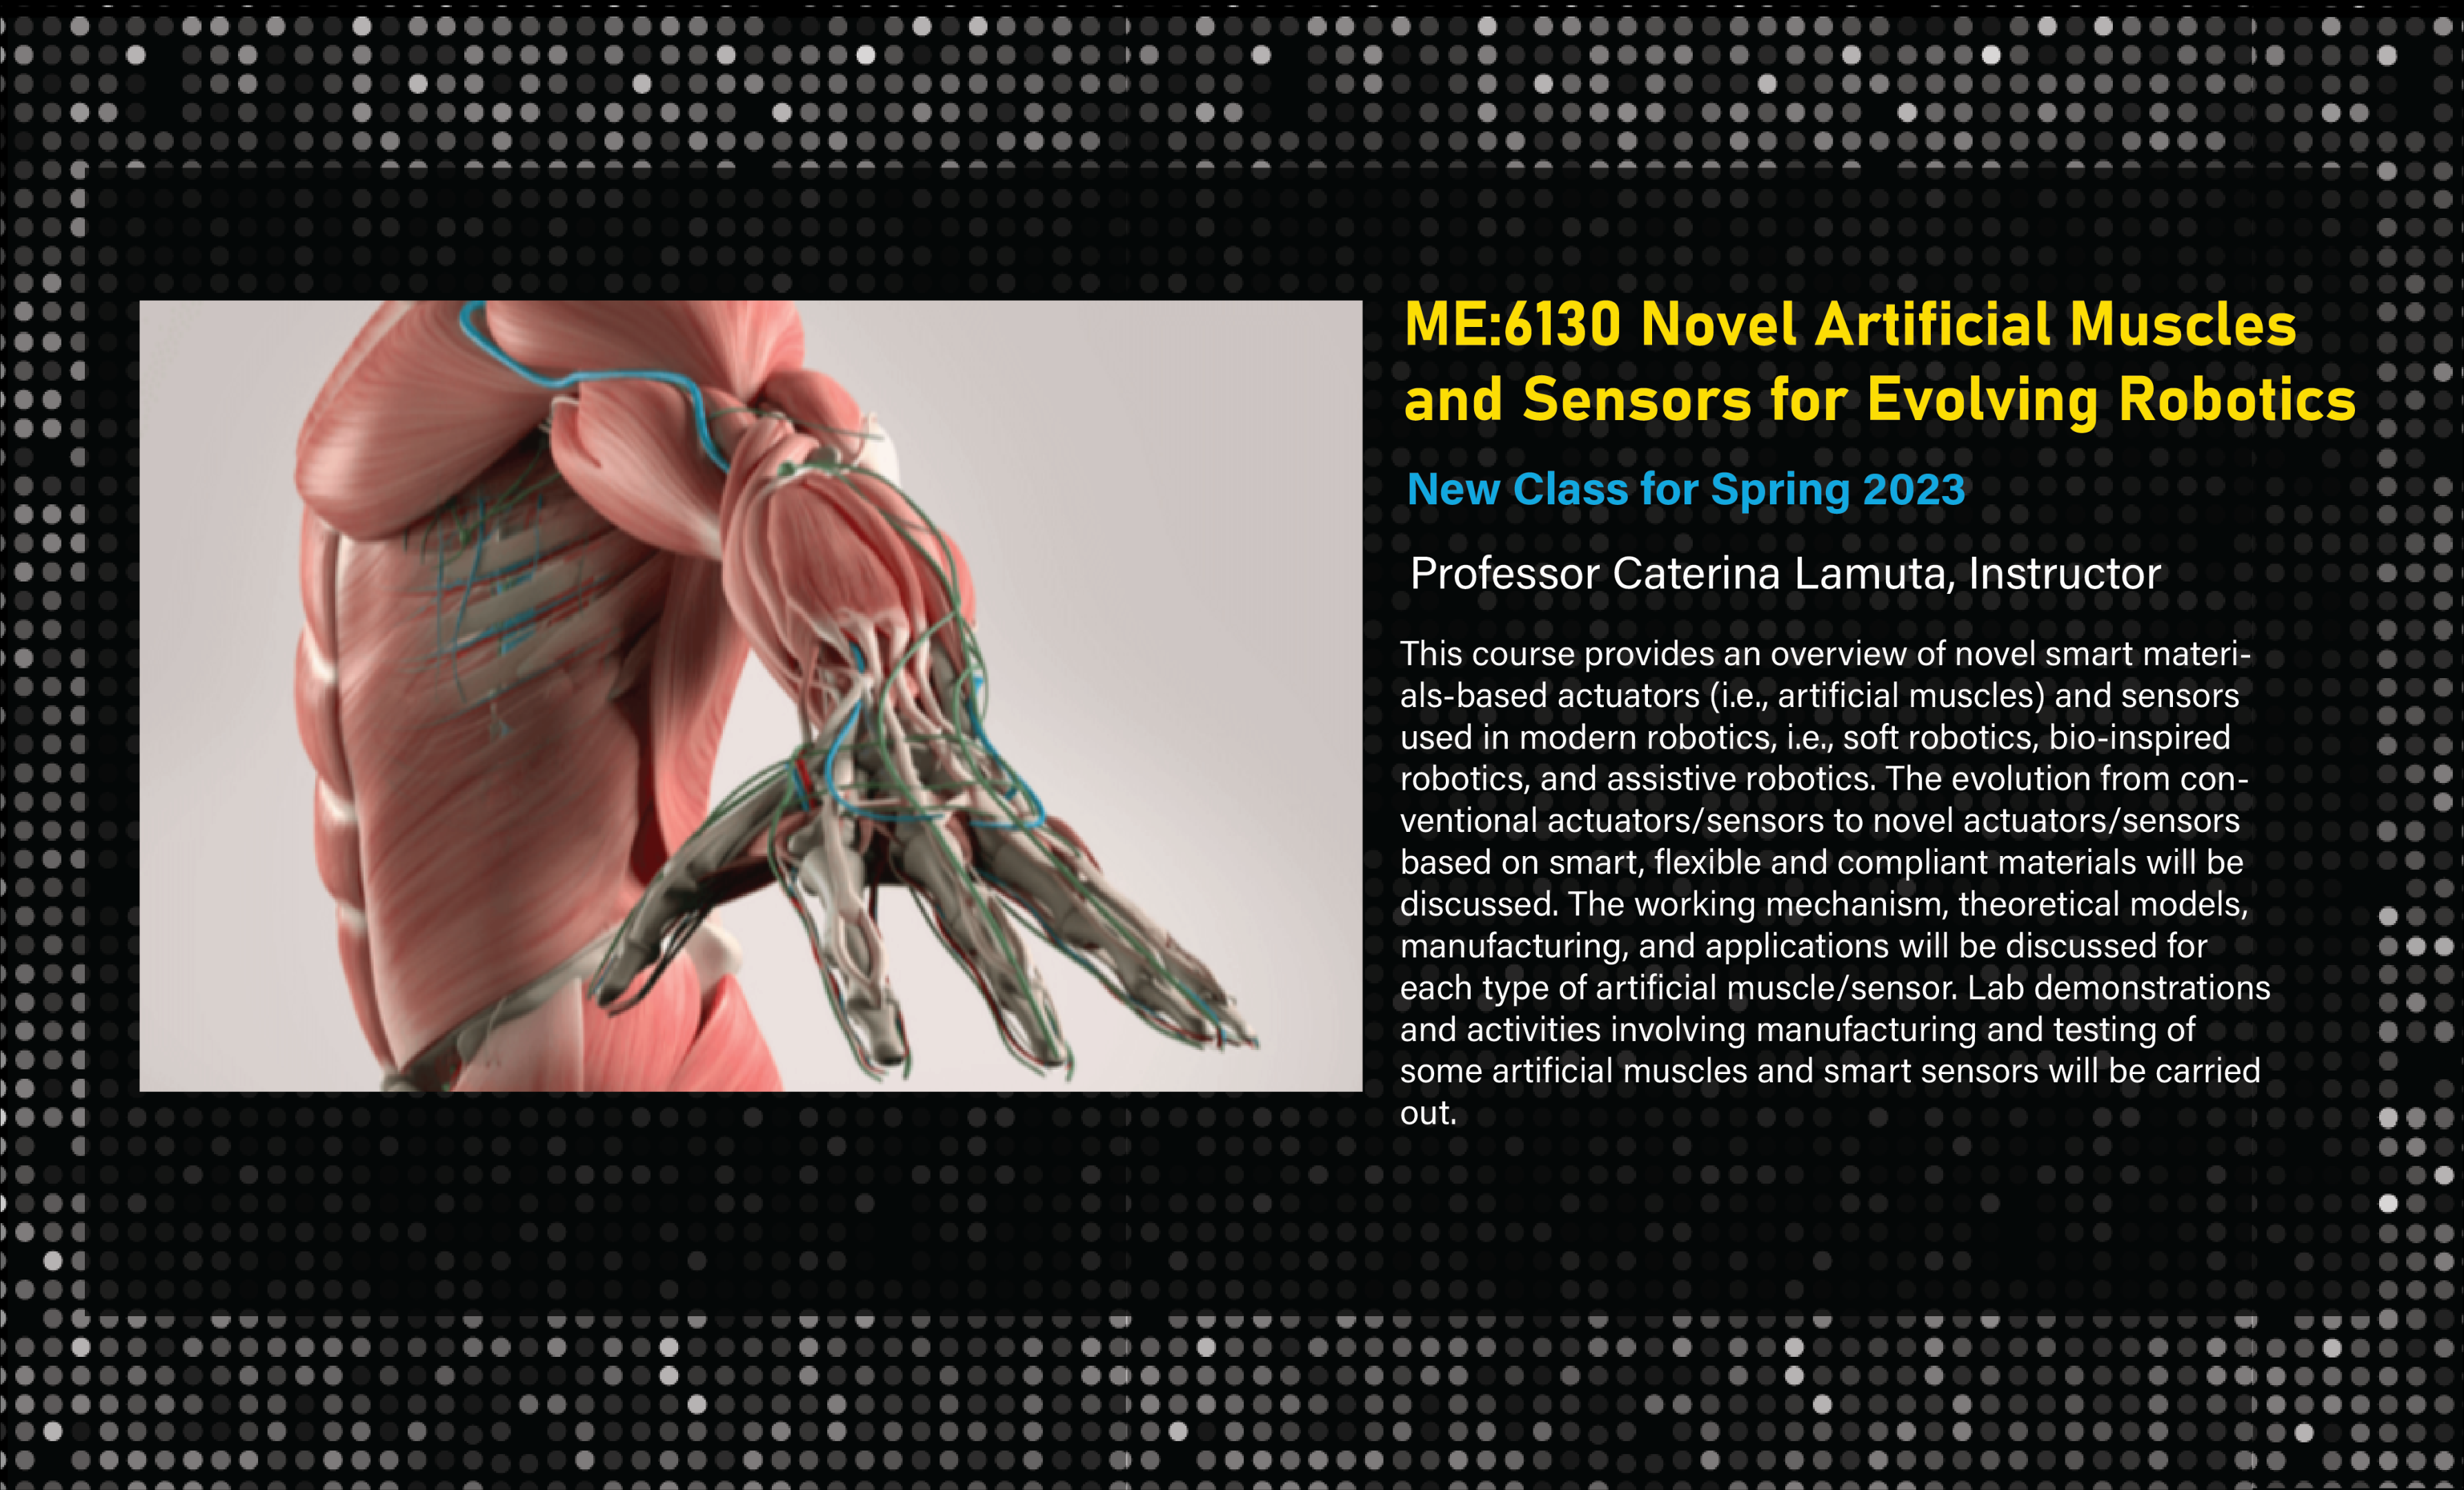 New class starting in the Spring of 2023, ME: 1630 Novel Artificial Muscles and Sensors for Evolving Robotics